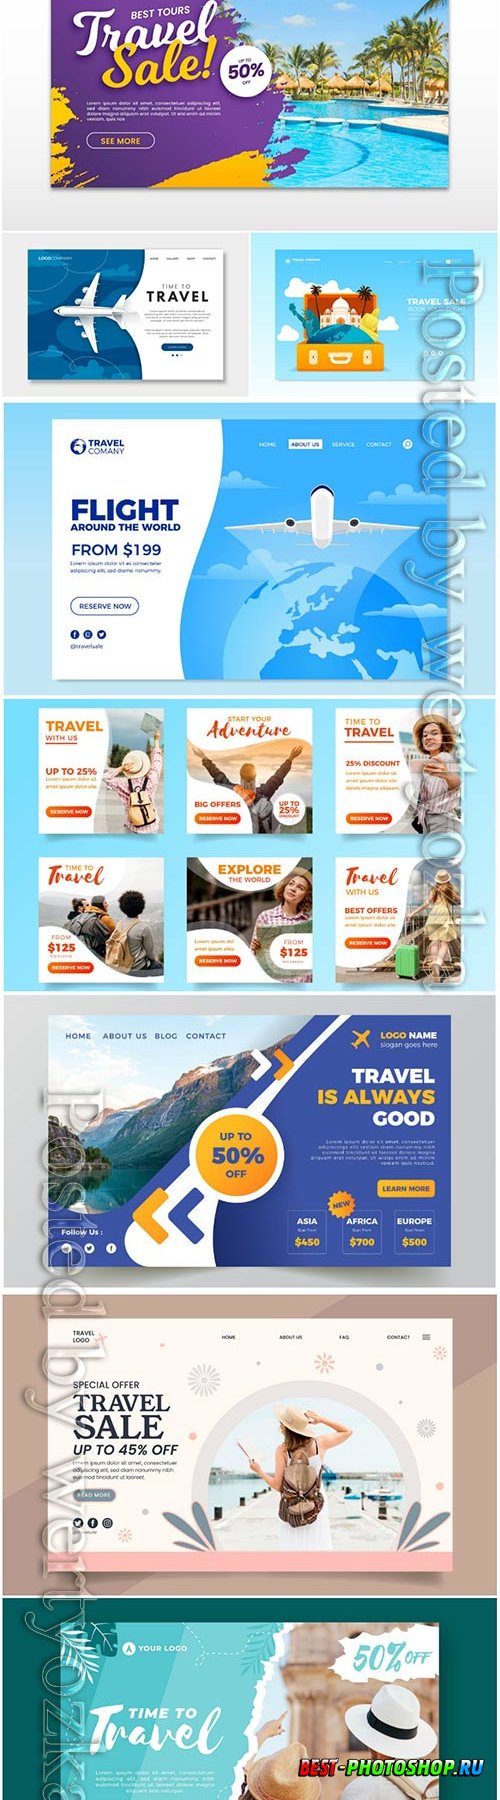 Travel sale landing page template